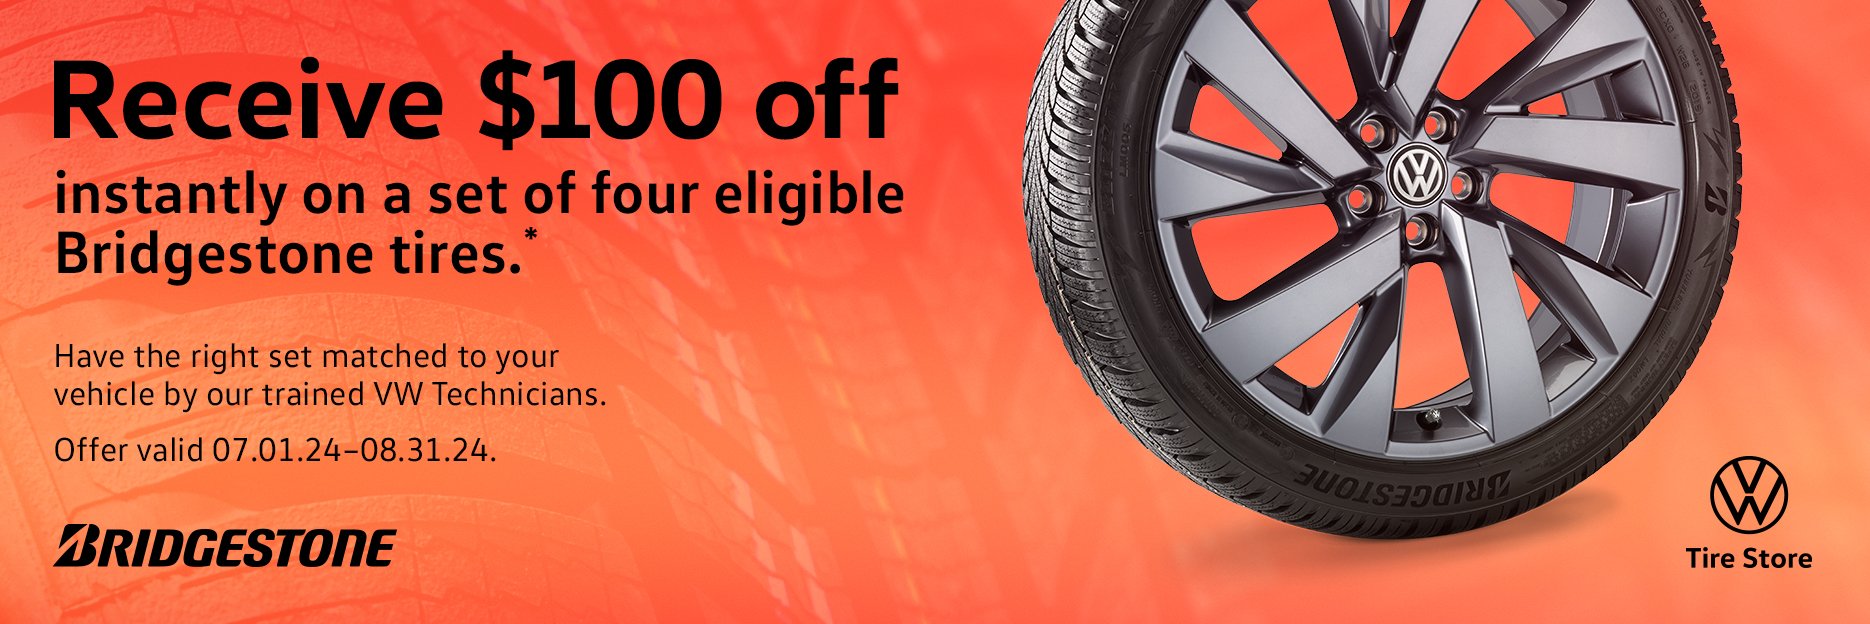 Receive $100 off instantly on a set of four eligible Bridgestone tires. Have the right set matched to your vehicle by our trained VW technicians. Offer valid 07.01.24-08.31.24.